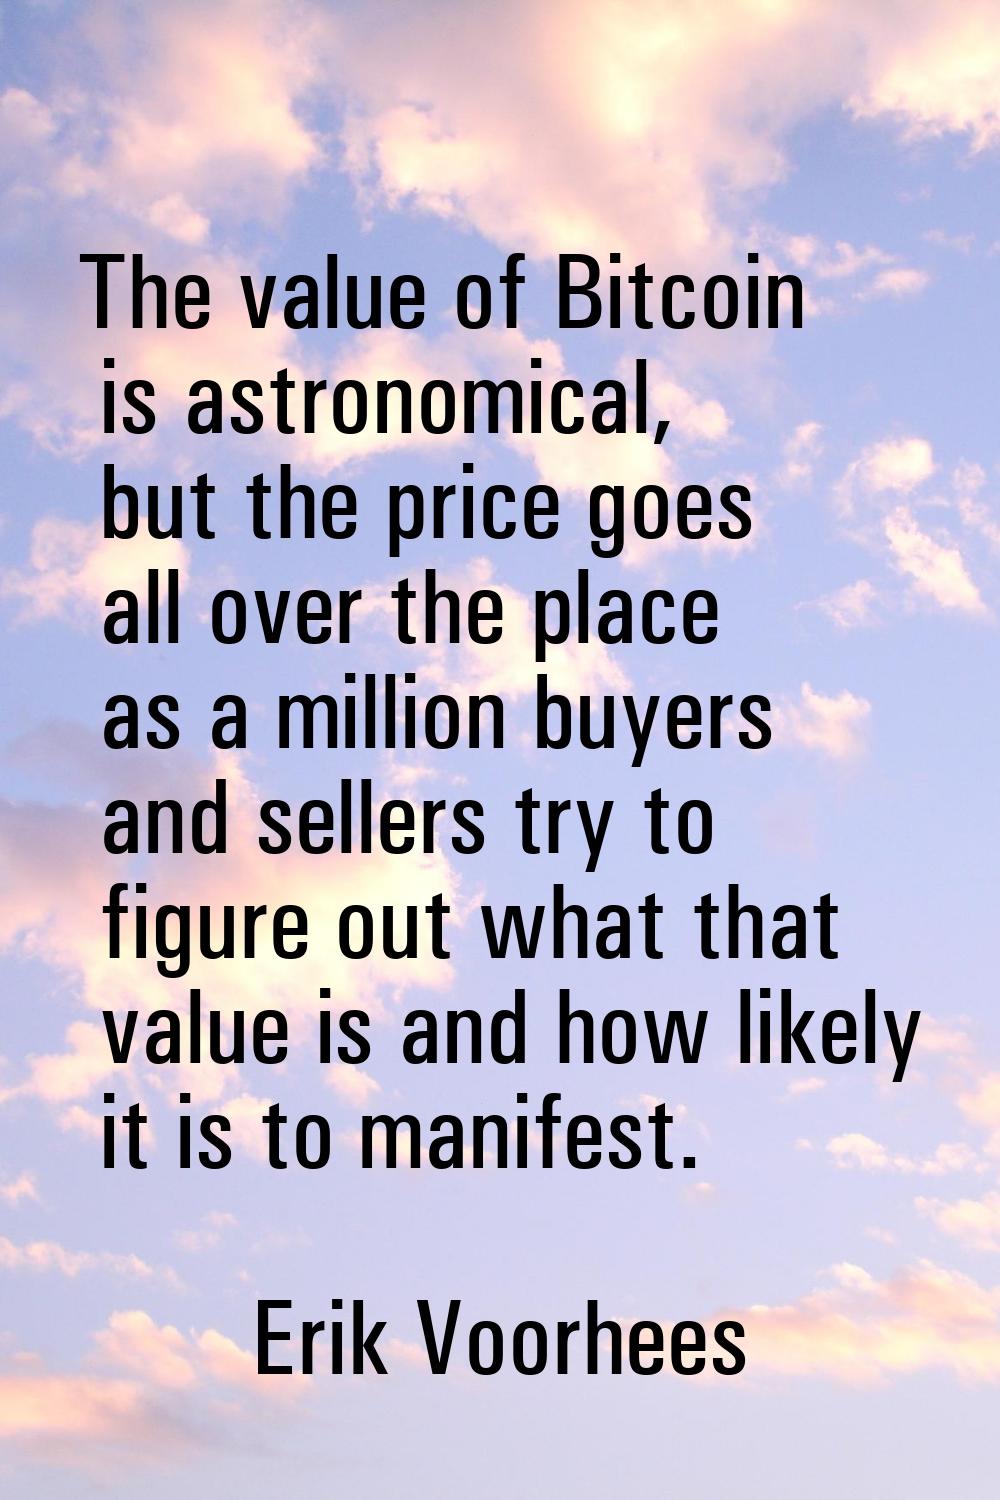 The value of Bitcoin is astronomical, but the price goes all over the place as a million buyers and